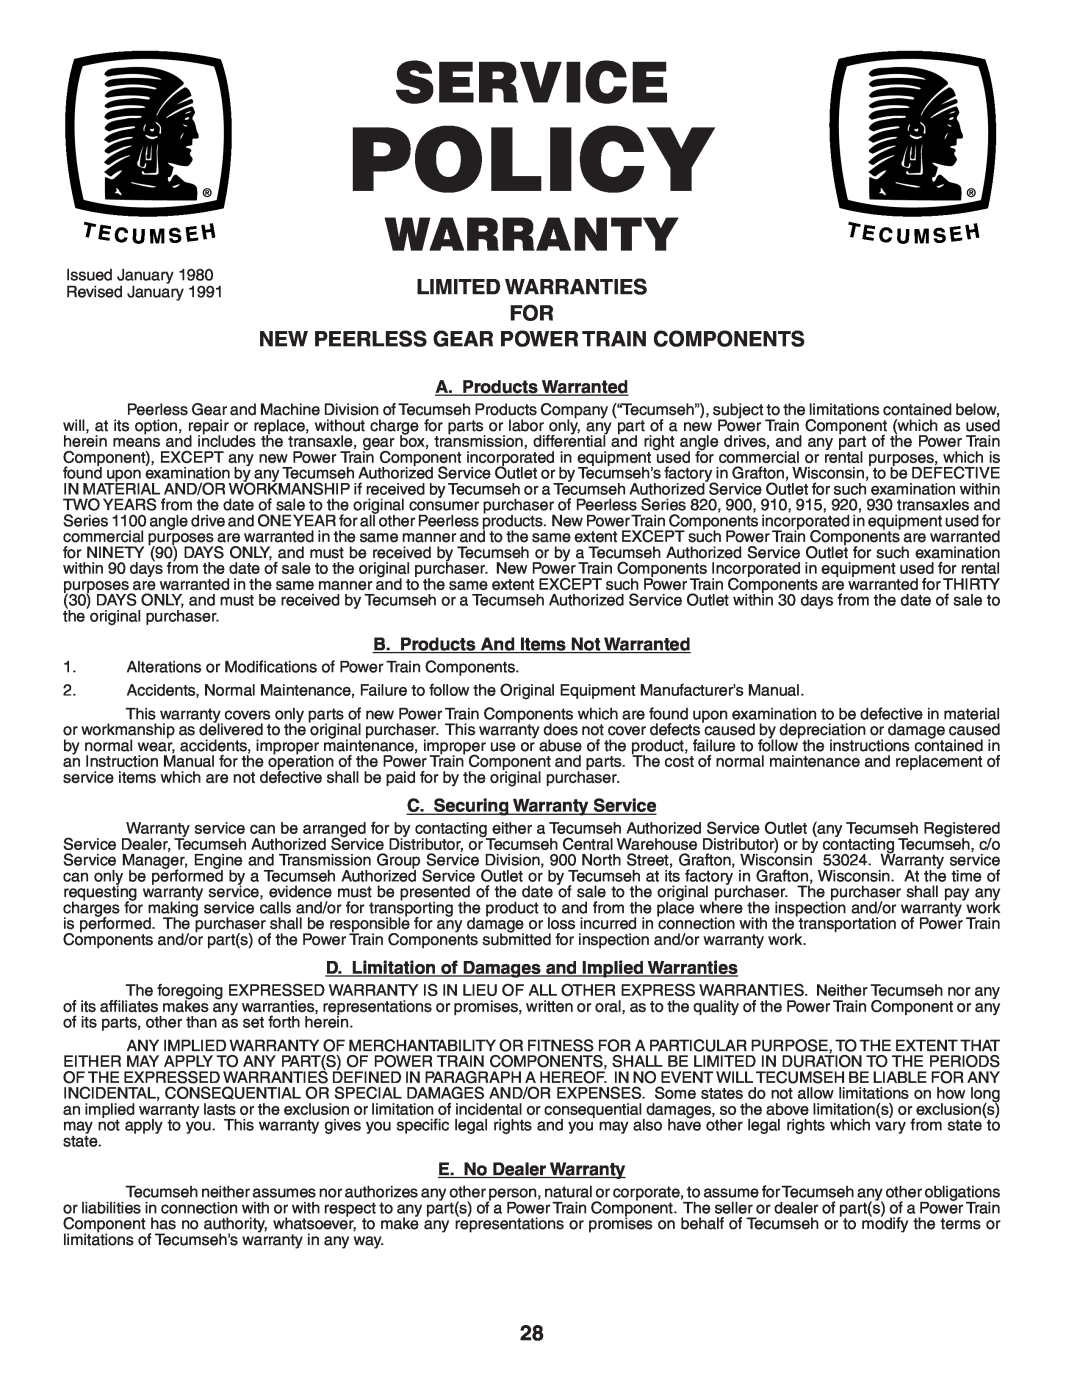 Poulan 403444 manual Limited Warranties For New Peerless Gear Power Train Components, Policy, Service, Warranty 